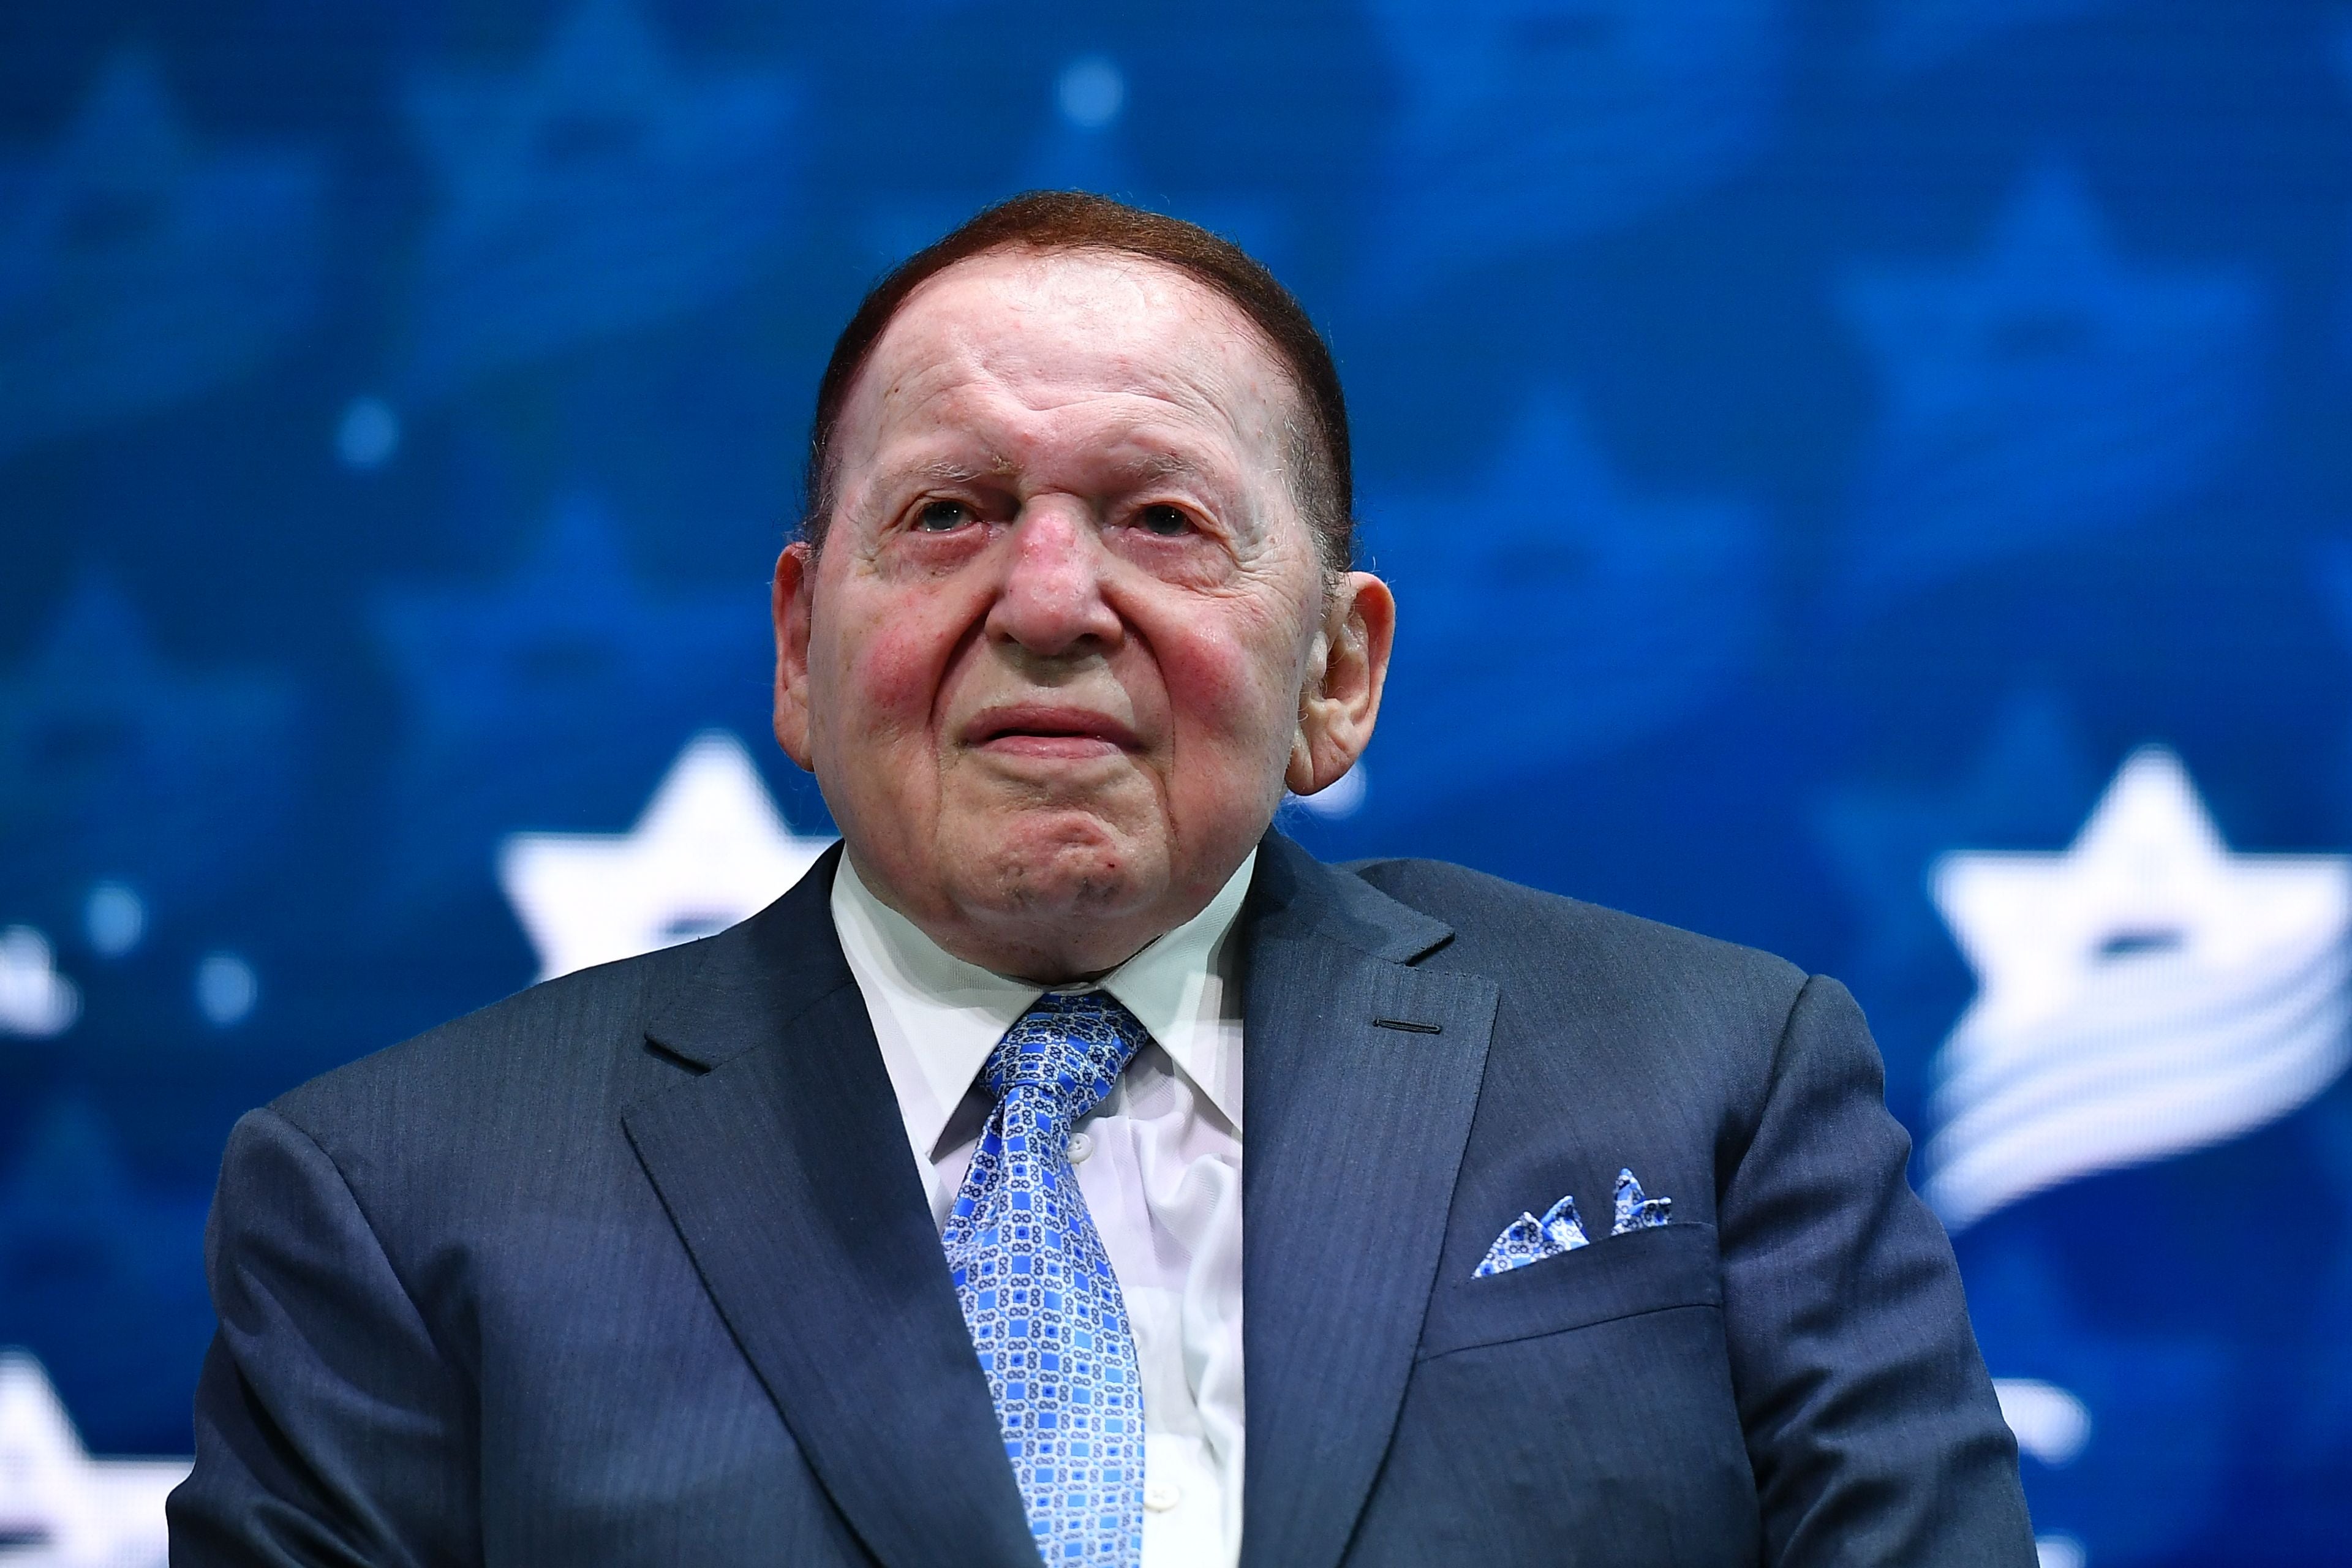 Sheldon Adelson, a casino tycoon and Republican megadonor, has died at the age of 87